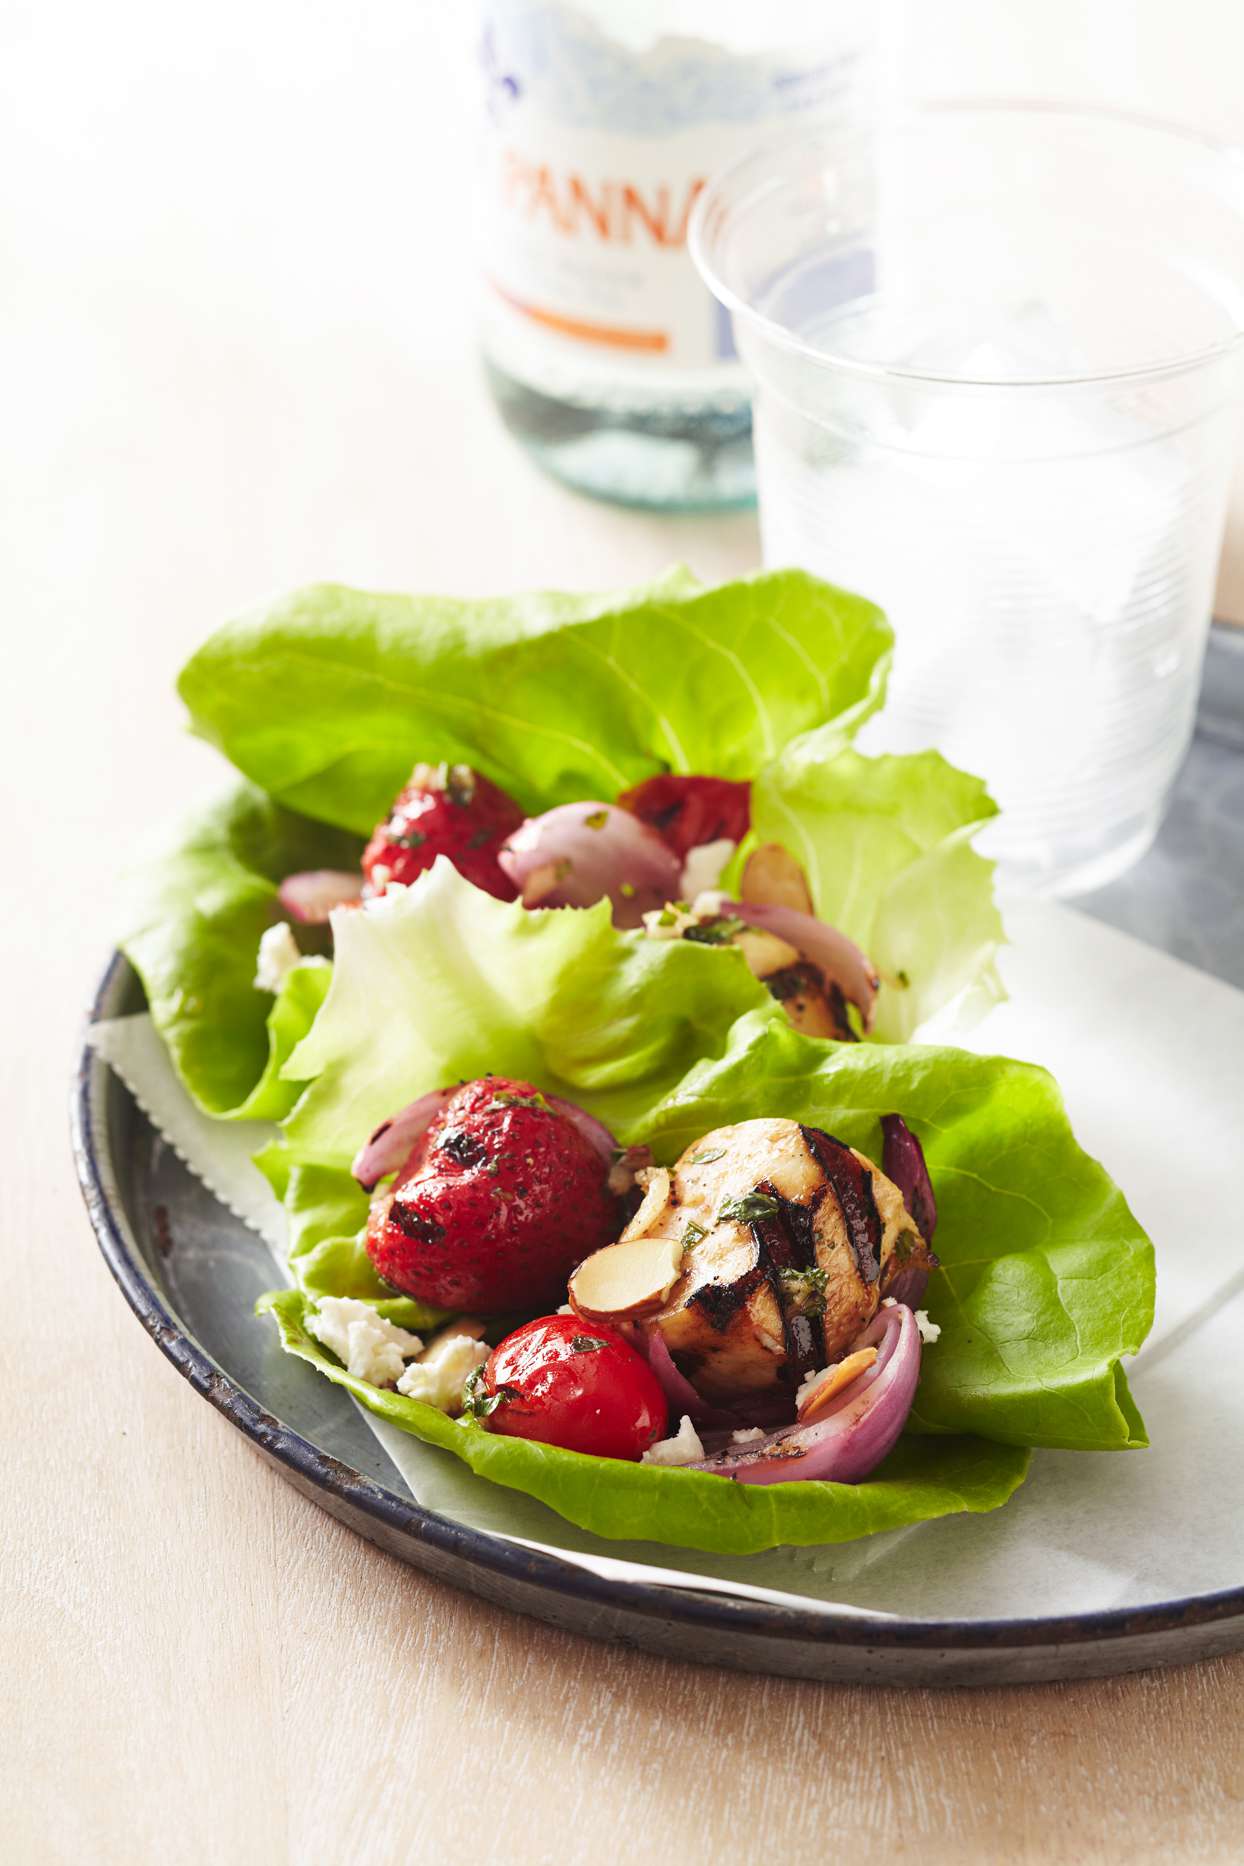 Grilled Strawberry, Tomato, and Chicken Wraps